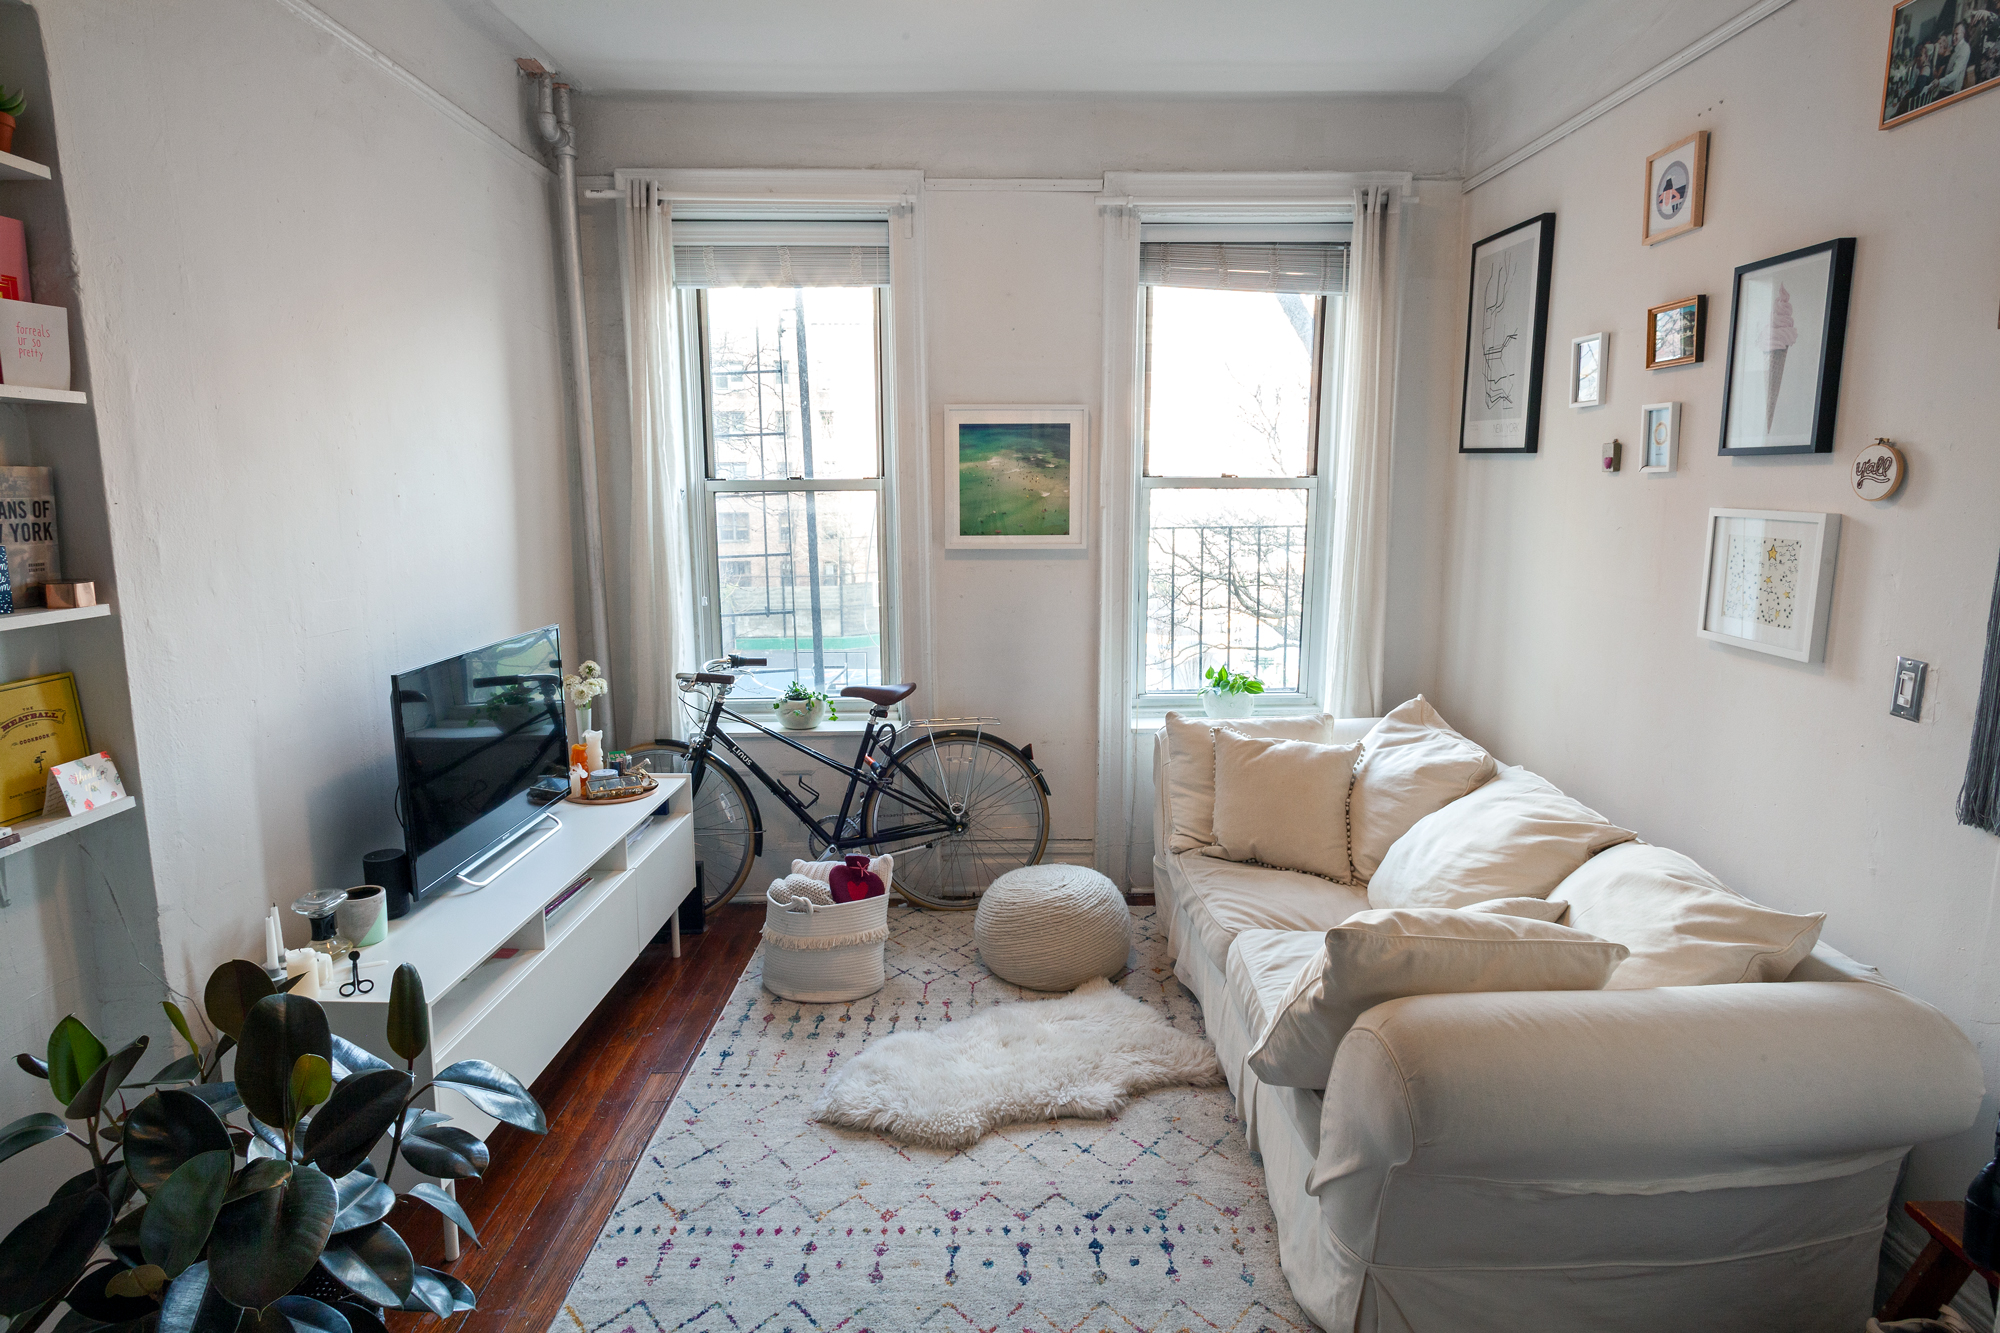 How to organize your small NYC apartment, according to the experts | 6sqft